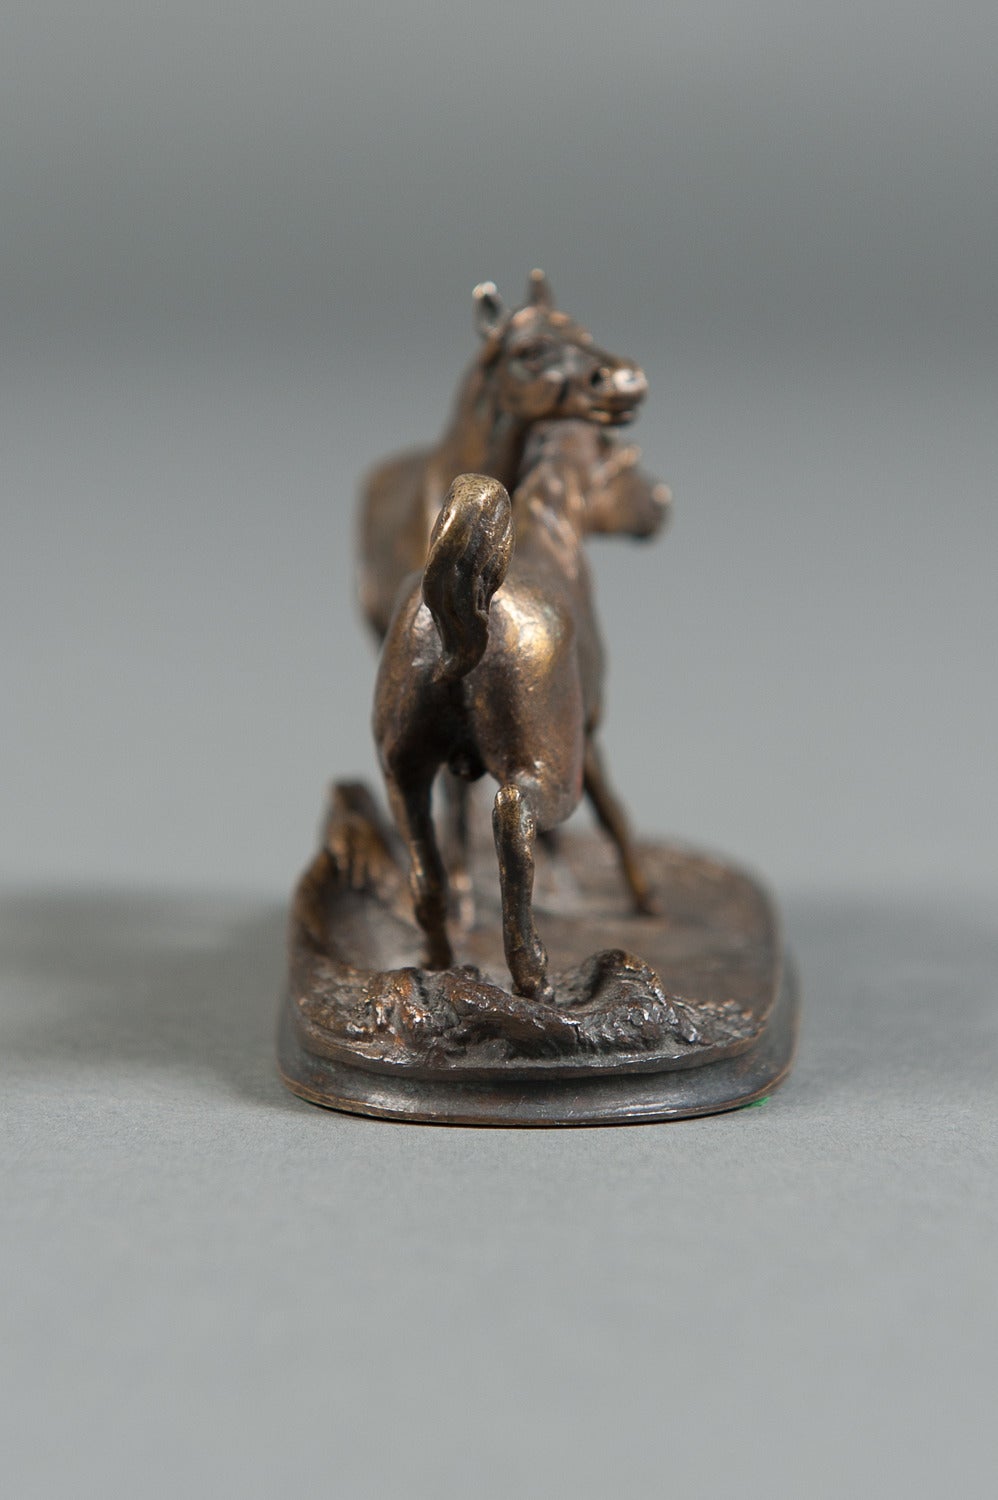 A French Patinated Miniature Bronze Figure of Two Horses by P.J. Mene

Circa 1890

Origin: France
 
Height: 3″
Width: 5″
Depth: 2″

Maker: P.J. Mene
 
Signed: P.J. Mene

Material: Bronze

Excellent Condition